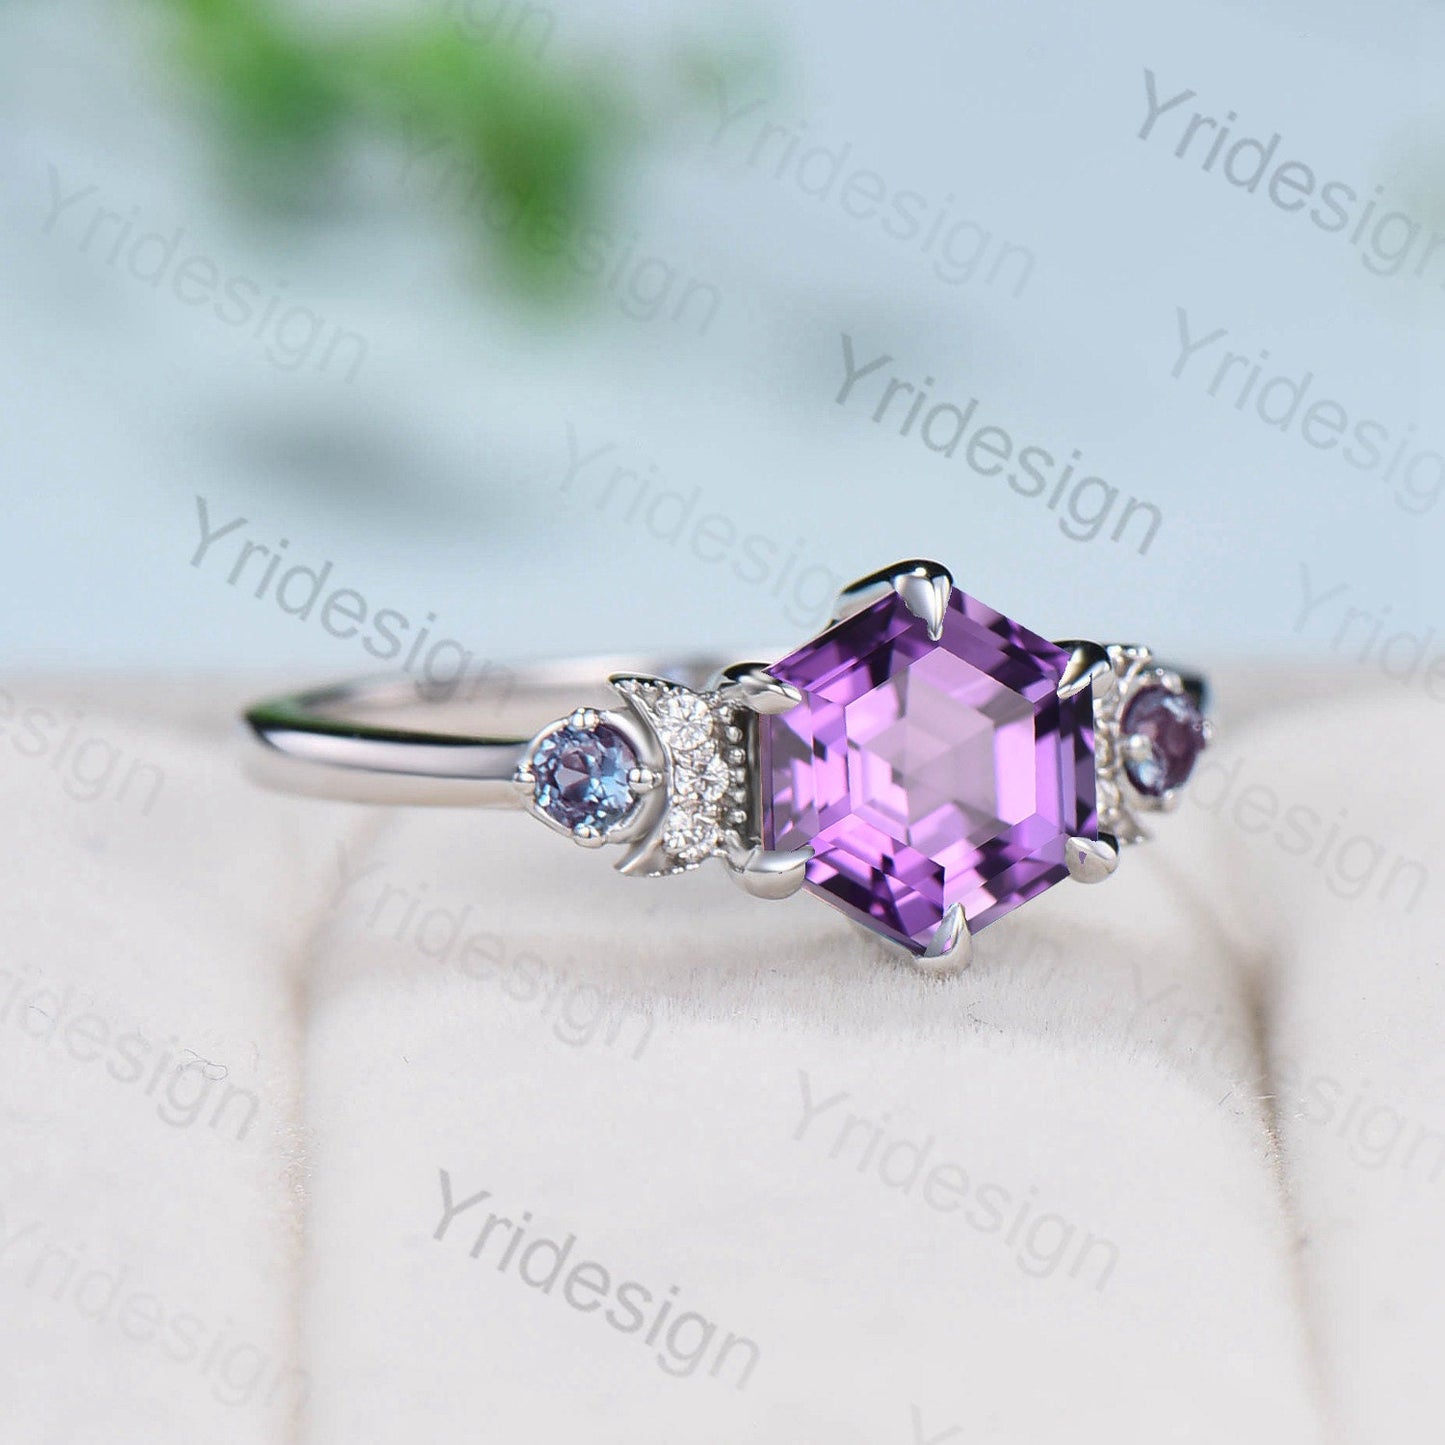 Unique hexagon amethyst engagement ring white gold Magic celestial moon Feb birthstone promise ring vintage crescent wedding ring gift women - PENFINE